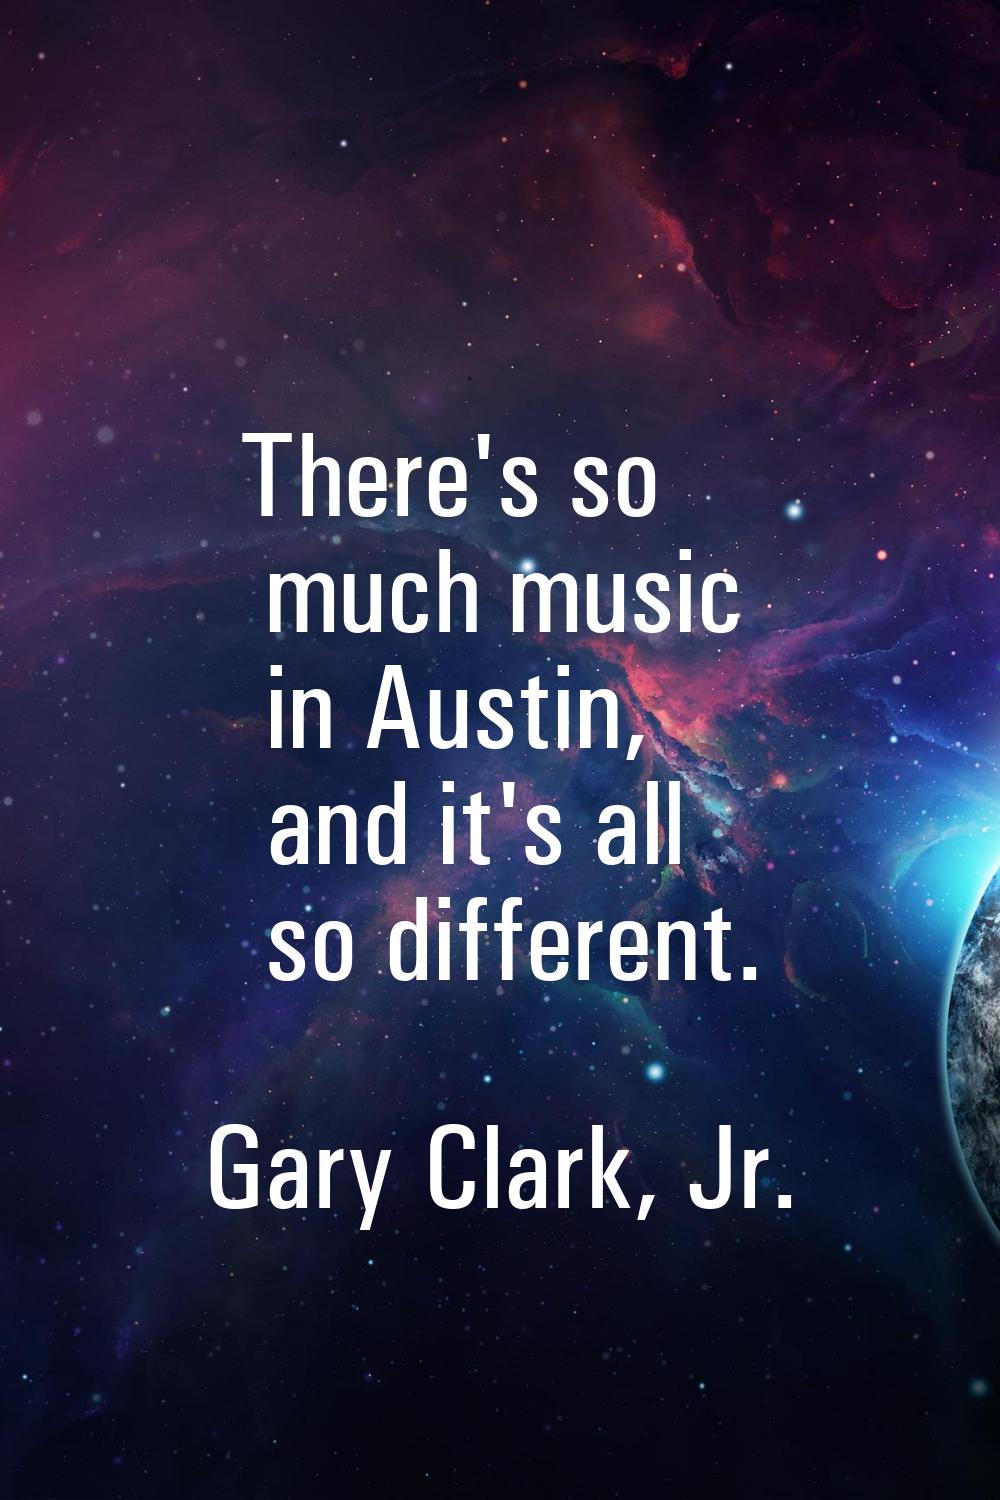 There's so much music in Austin, and it's all so different.